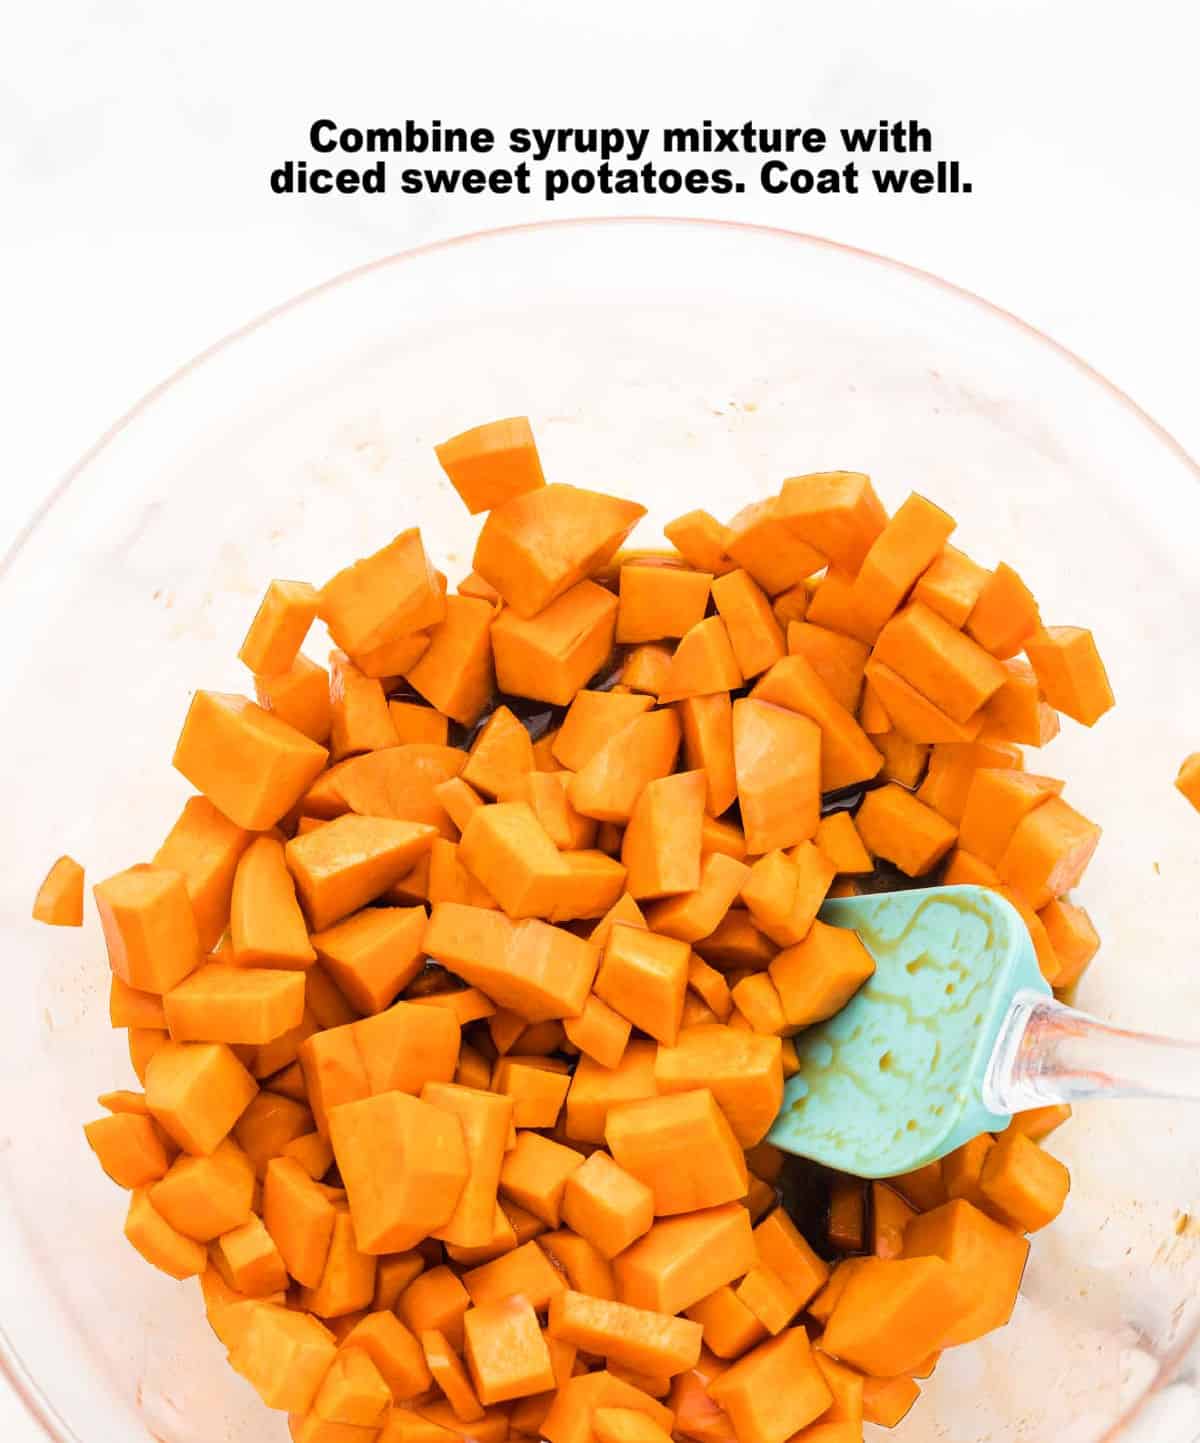 process step 2: diced sweet potatoes in a glass bowl tossed in the sugar and balsamic vinegar mixture